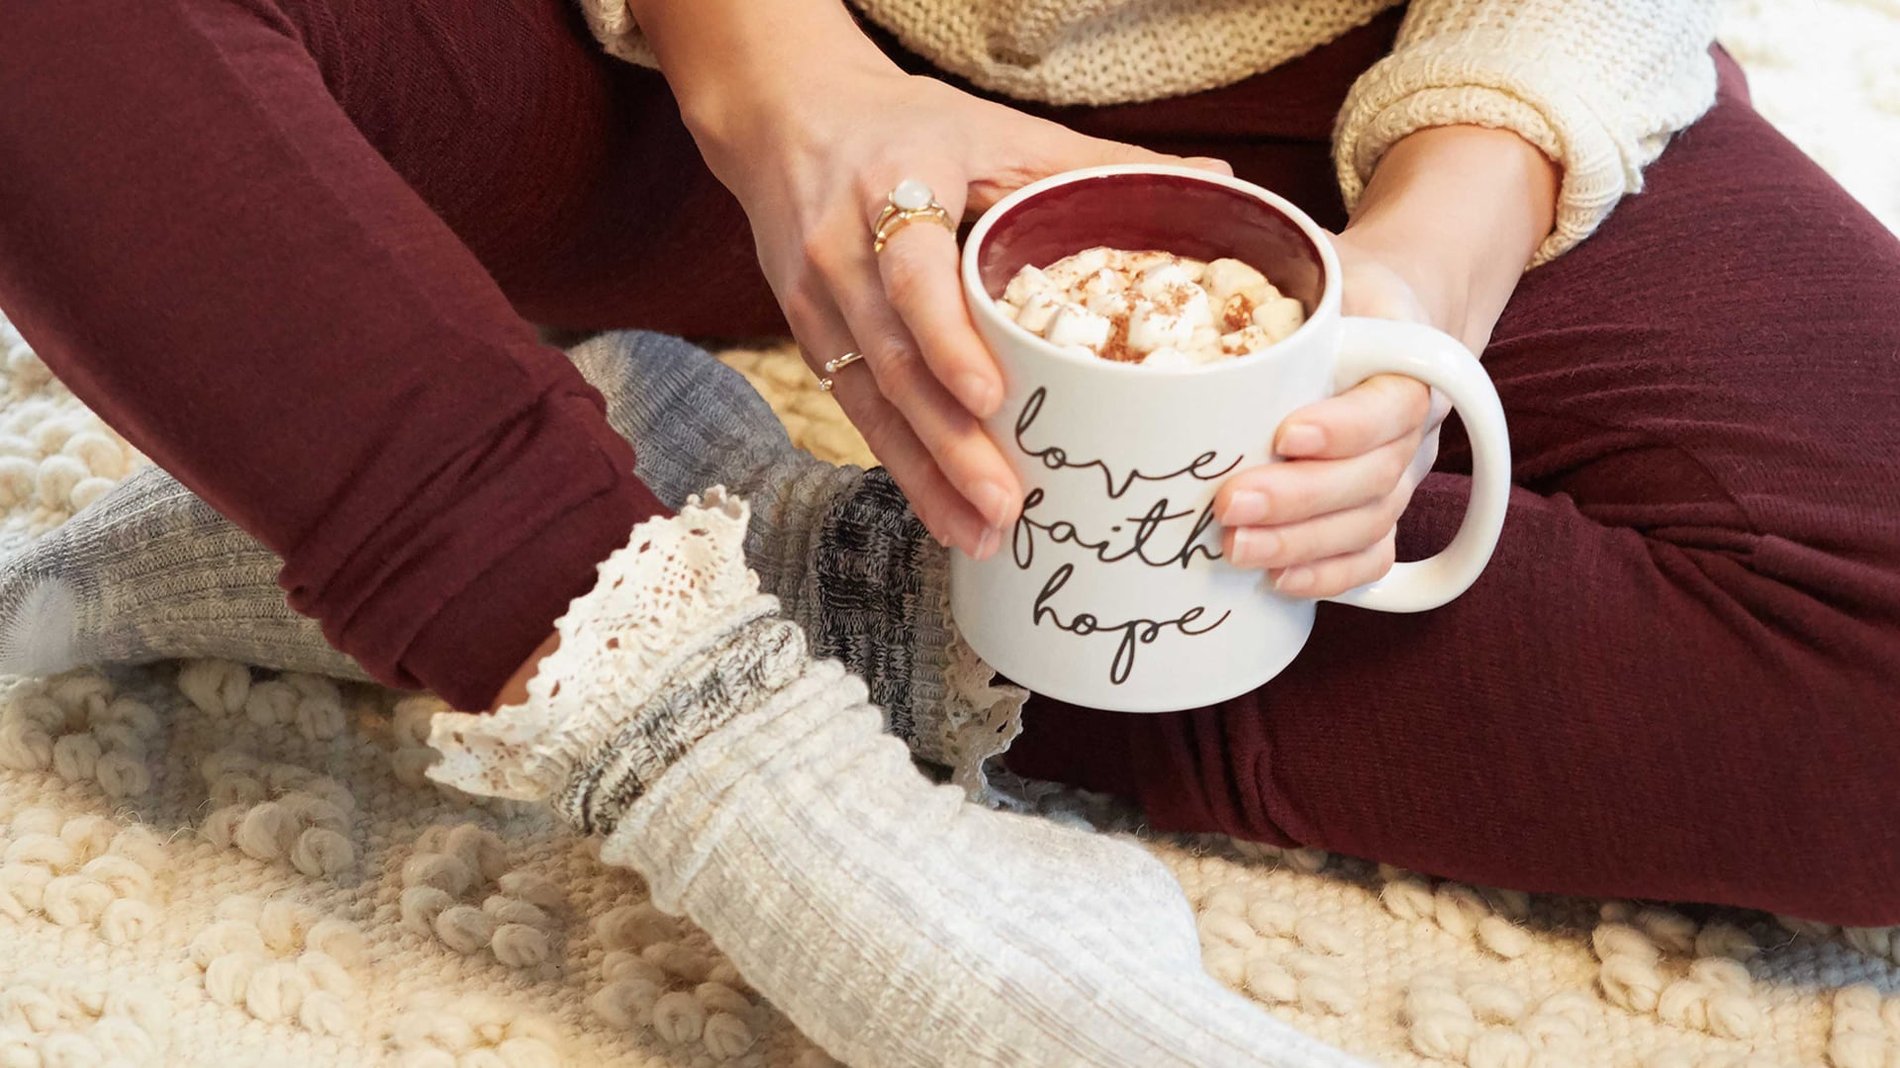 A woman sits on a plush white carpet in comfortable cable knit socks, burgundy leggings and a waffle knit beige sweater, she is holding a mug that says "Love, faith & hope" in cursive.